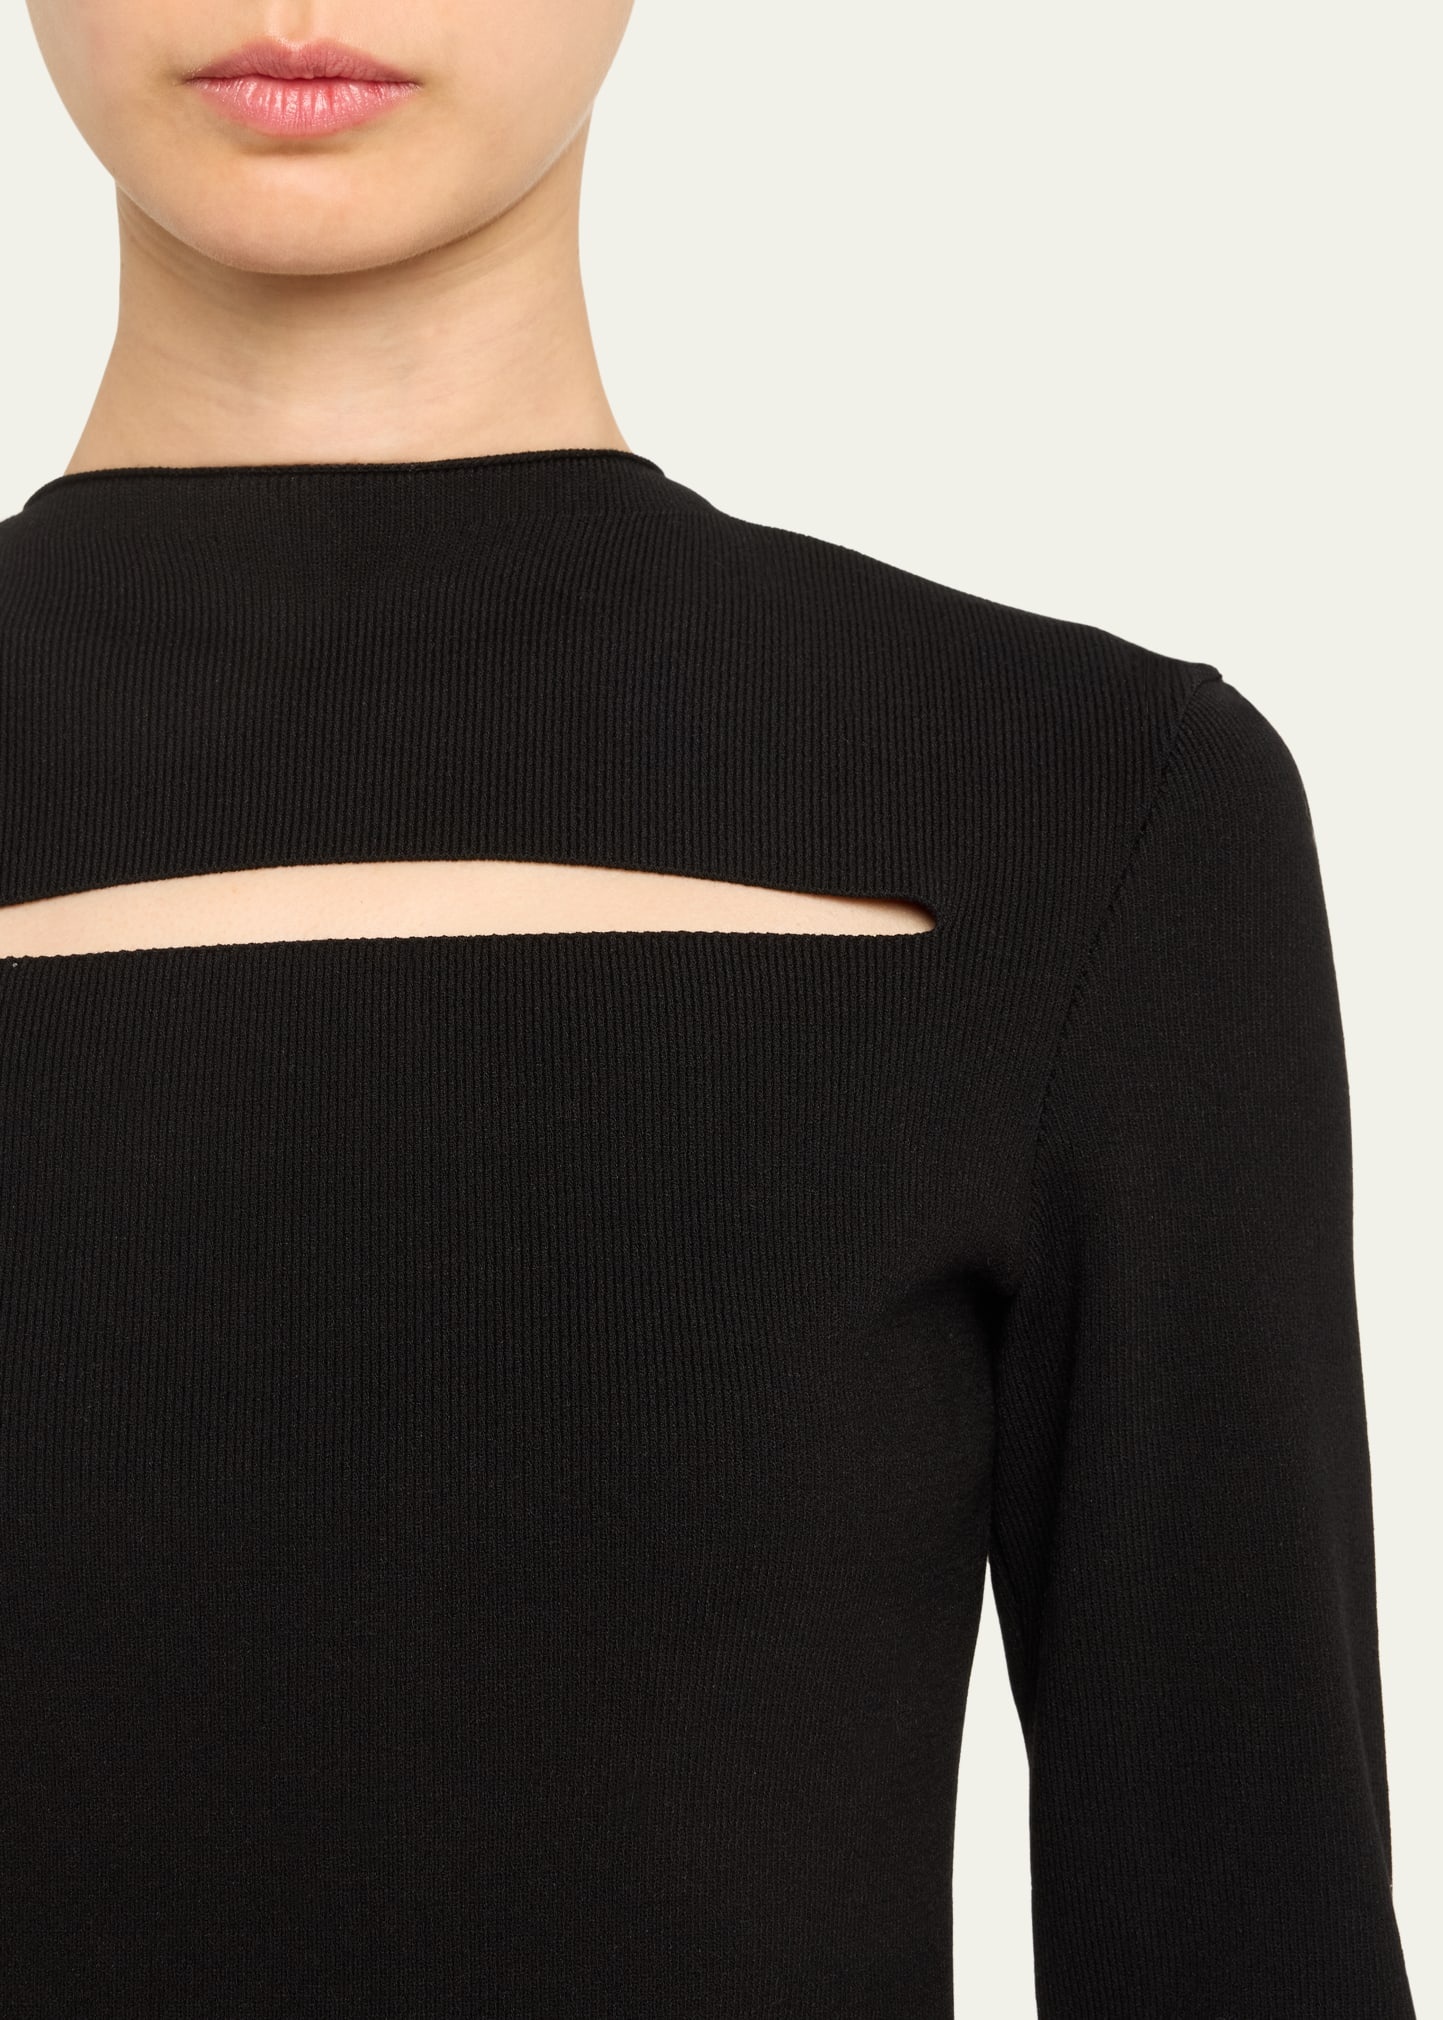 Long-Sleeve Cut-Out Knit Top - 5